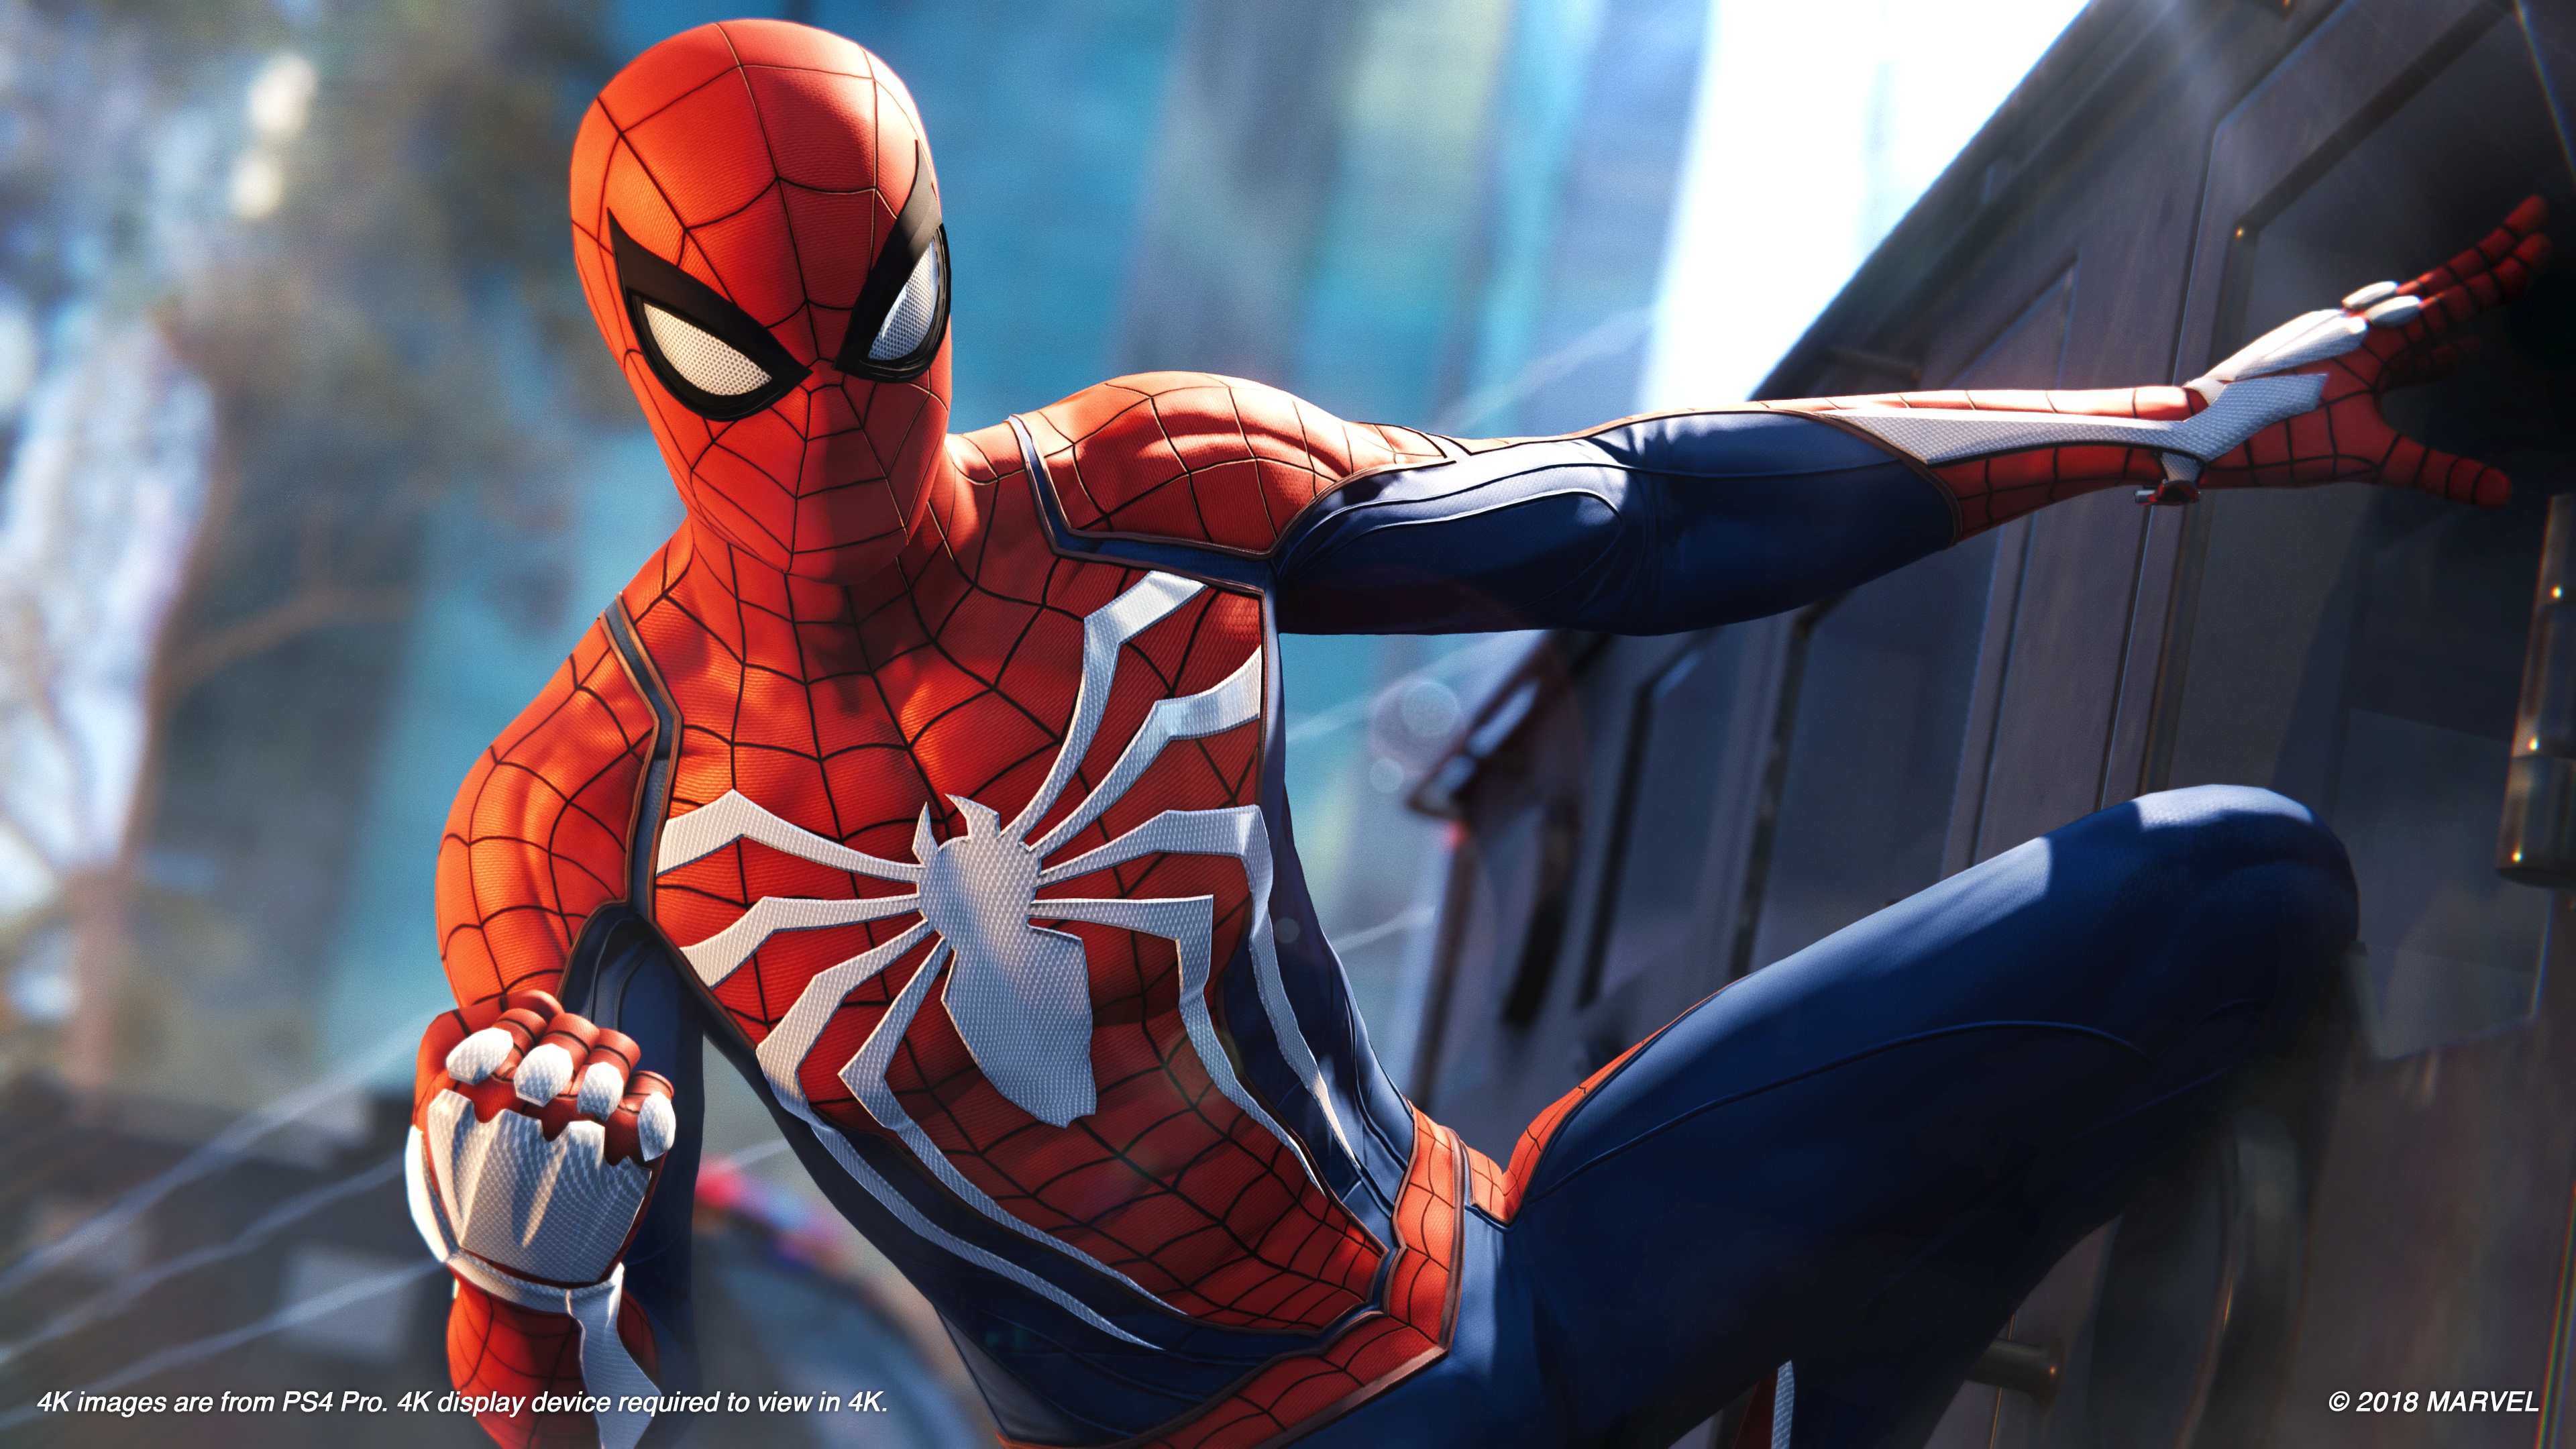 Spider-Man PS4 1.09 Update – Check Out What’s New In The Game